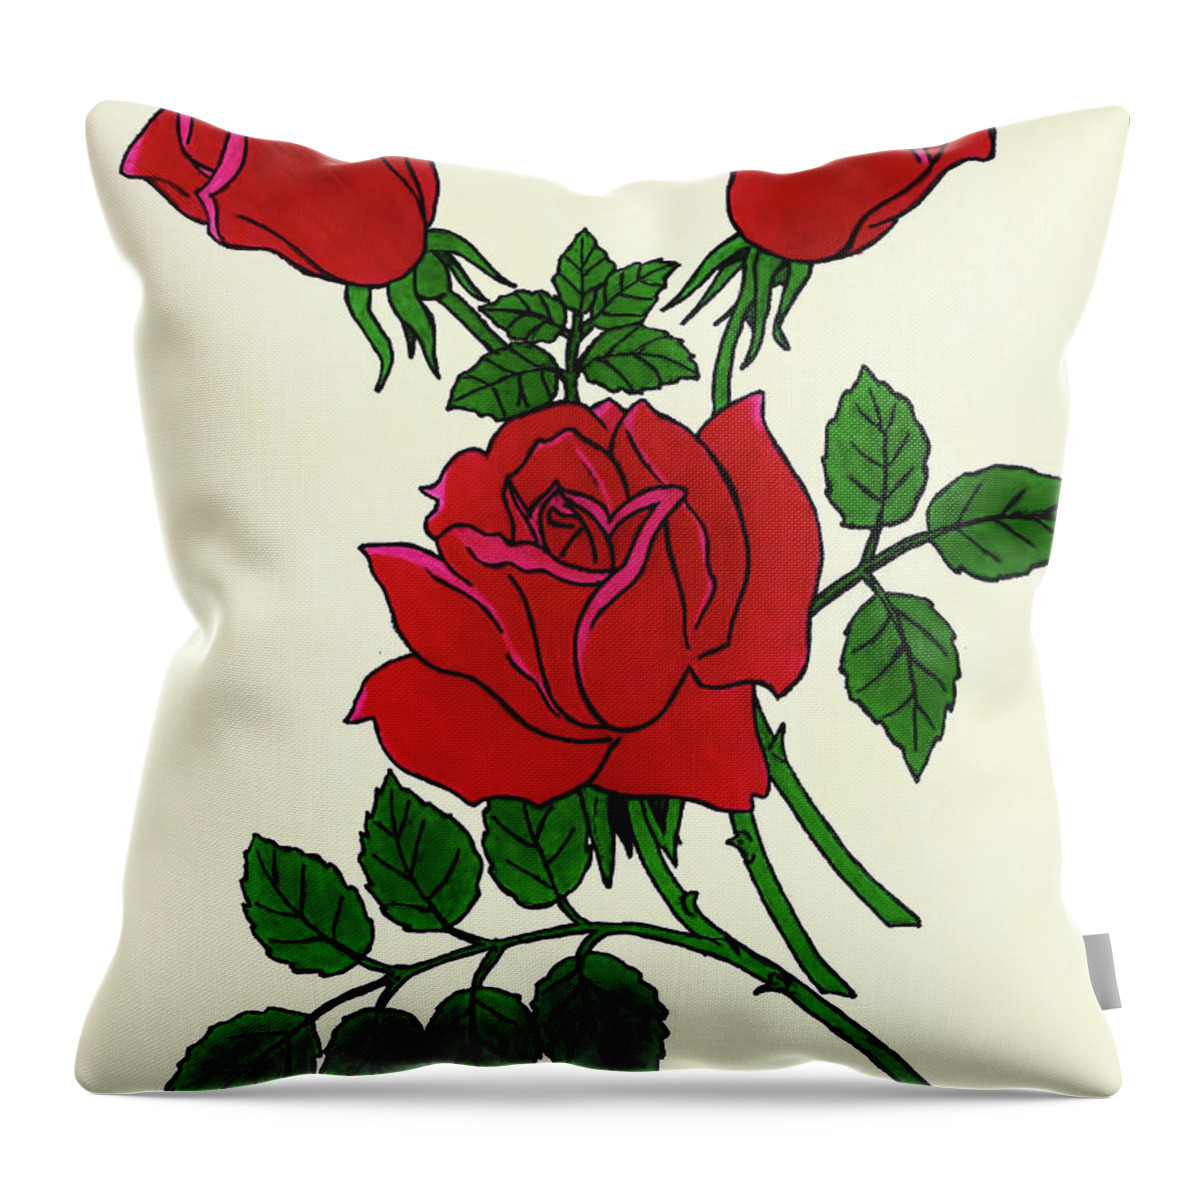 Rose Throw Pillow featuring the drawing Irish Rose by D Hackett